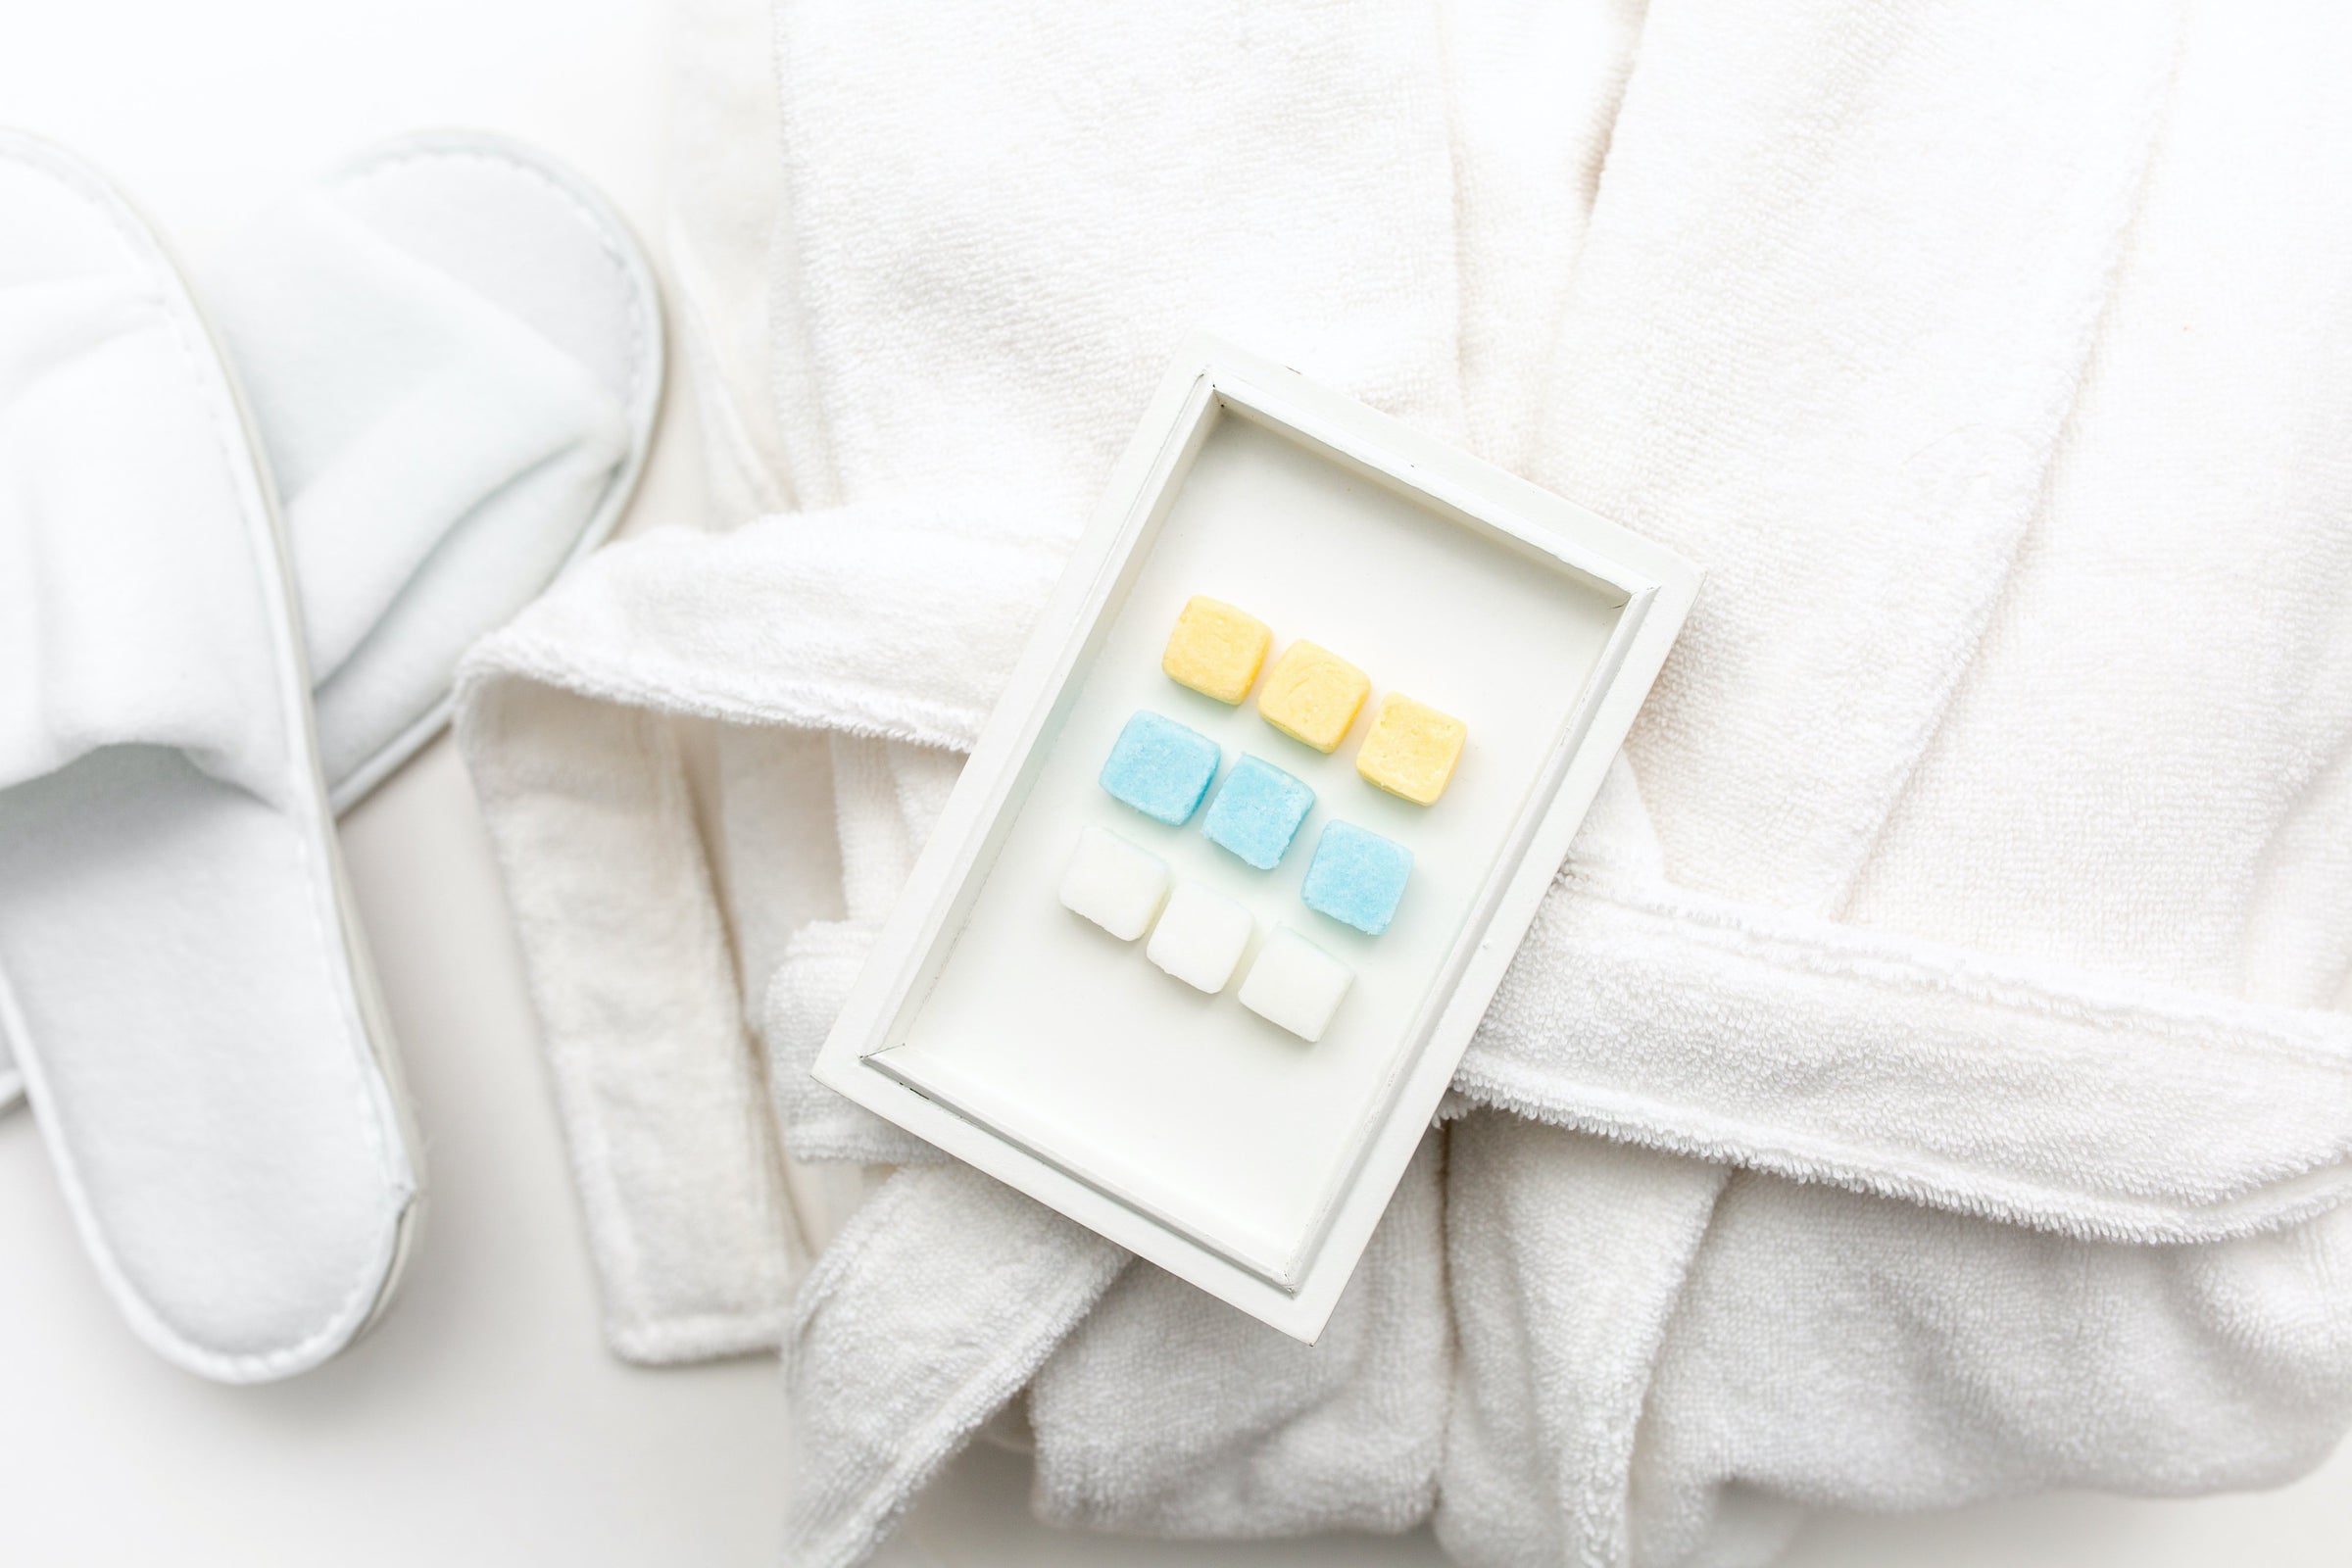 Image of bathrobe, slippers and EarthSuds travel-size biodegradable tablets of shampoo, conditioner, and body wash